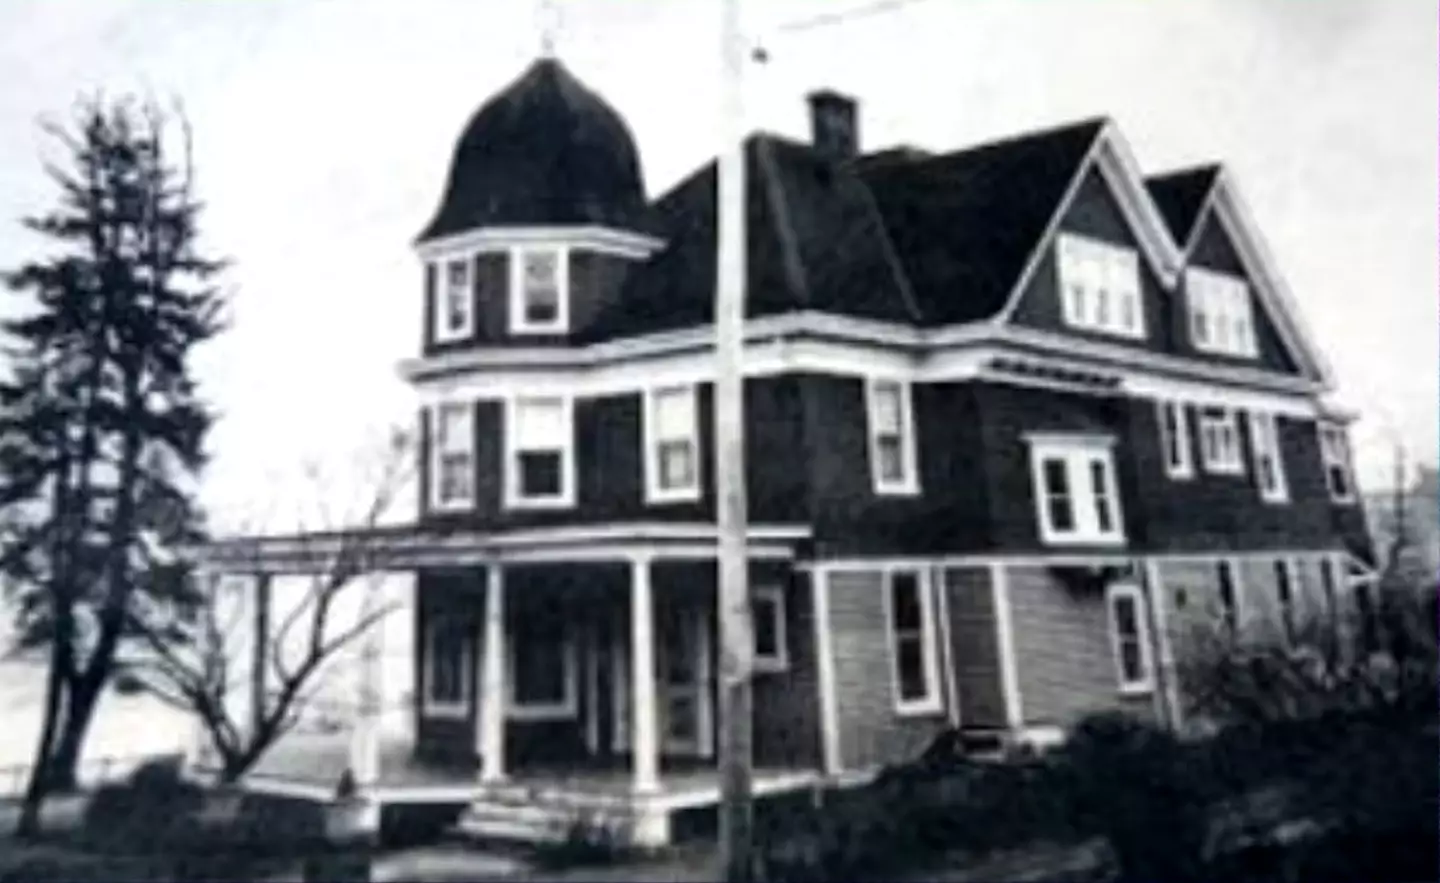 1 LaVeta Place in Nyack, New York, is the first house to be legally declared haunted.